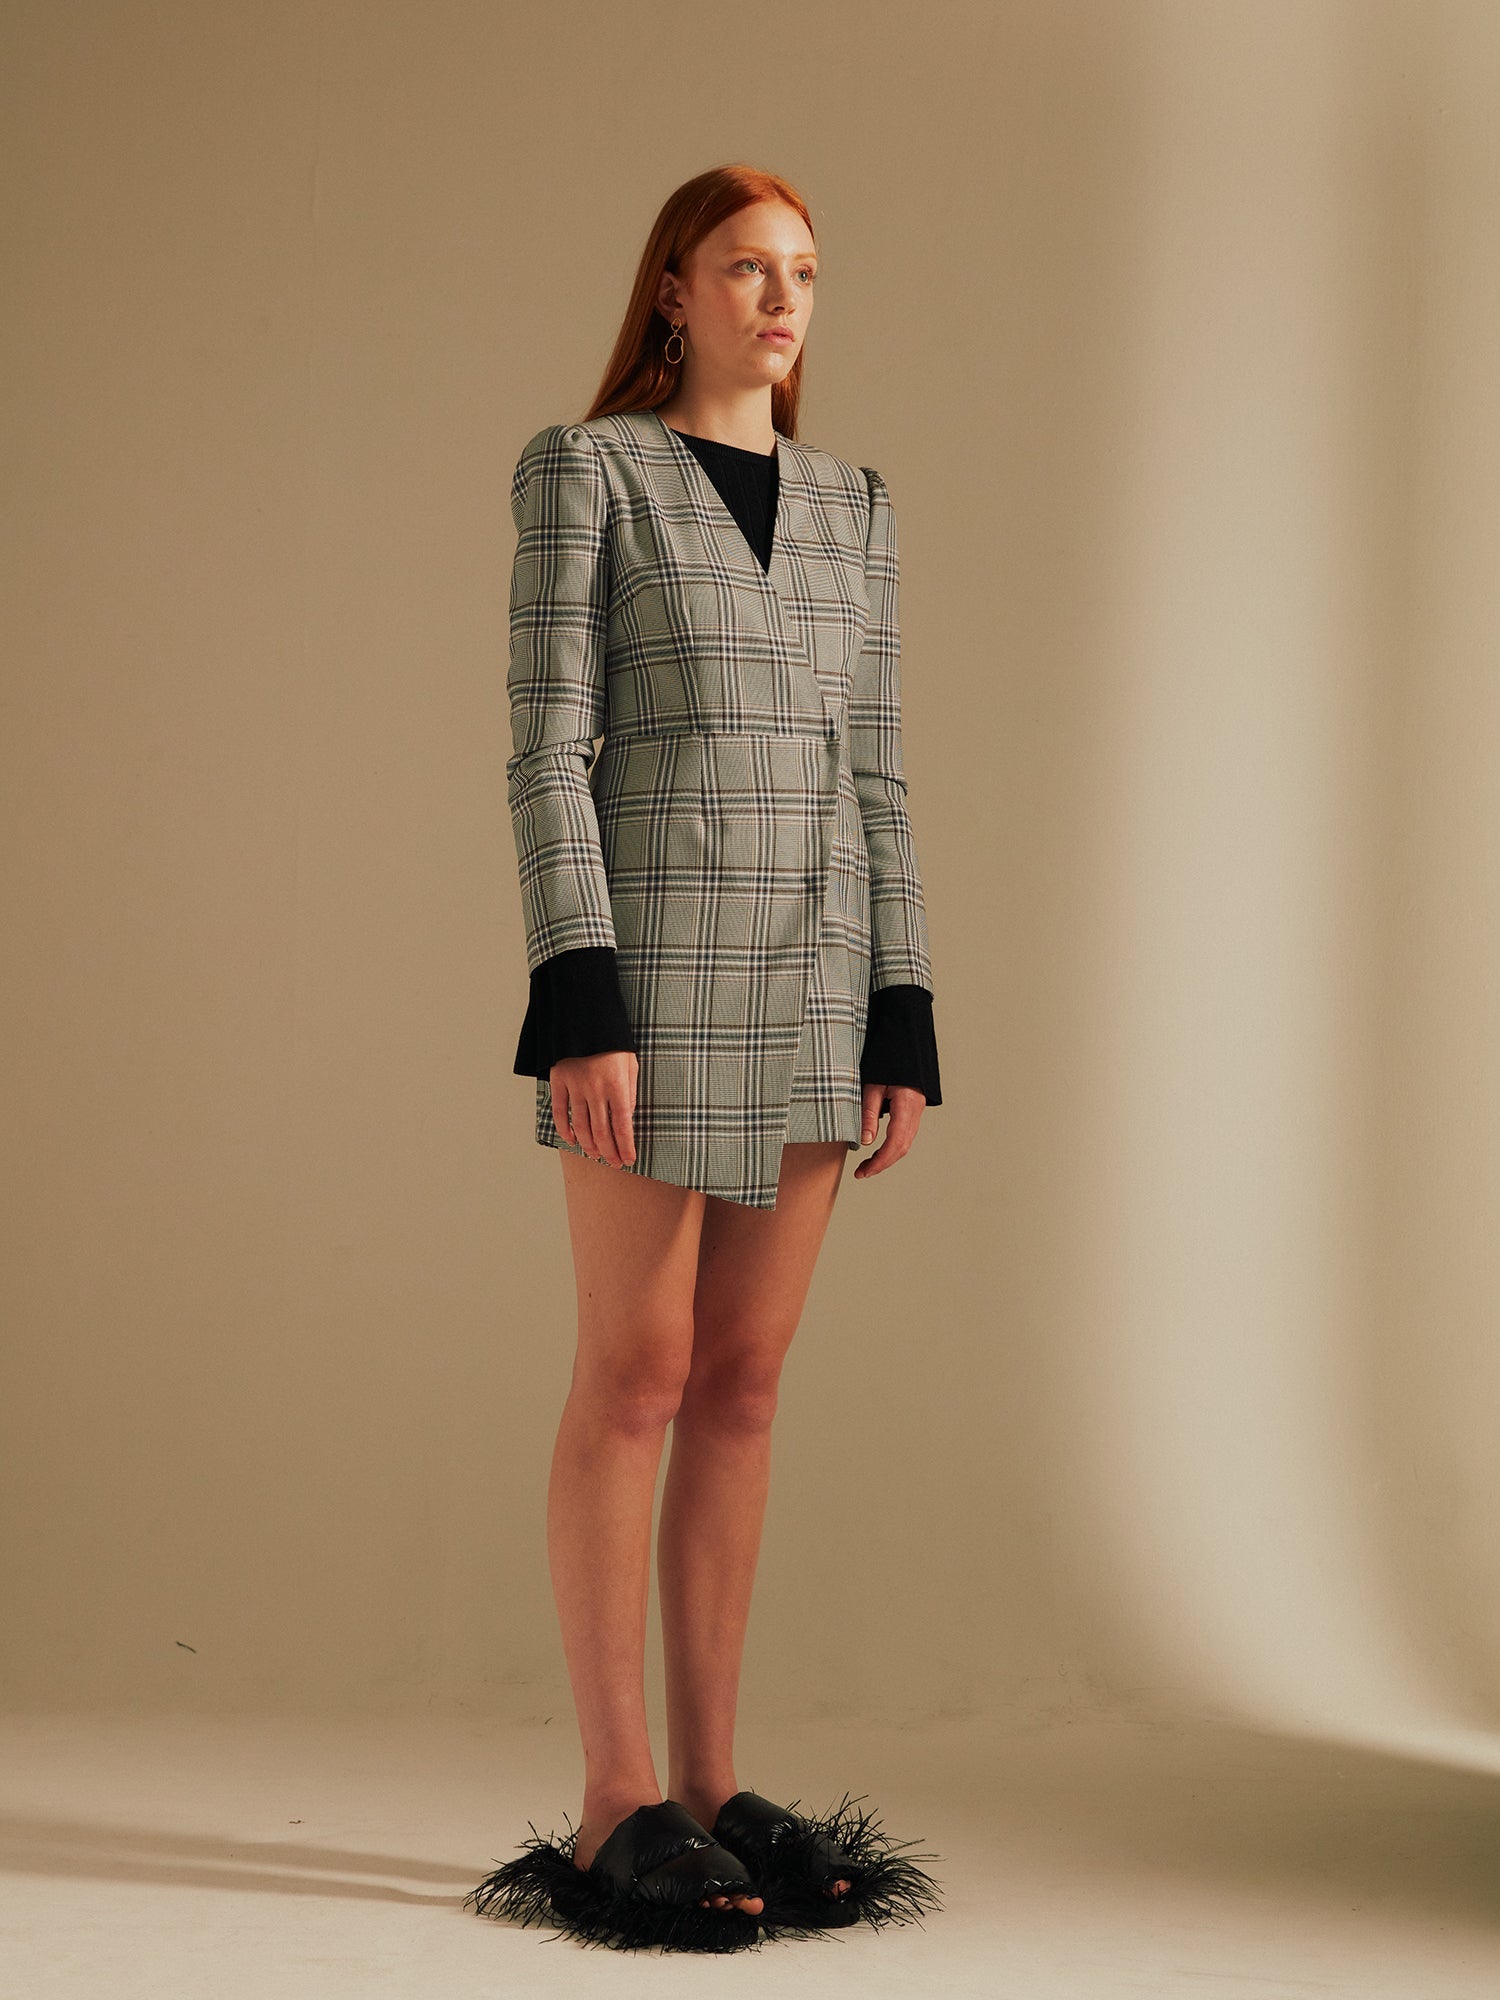 model faces sideways standing straight in the Amelia Heritage Asymmetric Blazer Dress with fluffy slippers